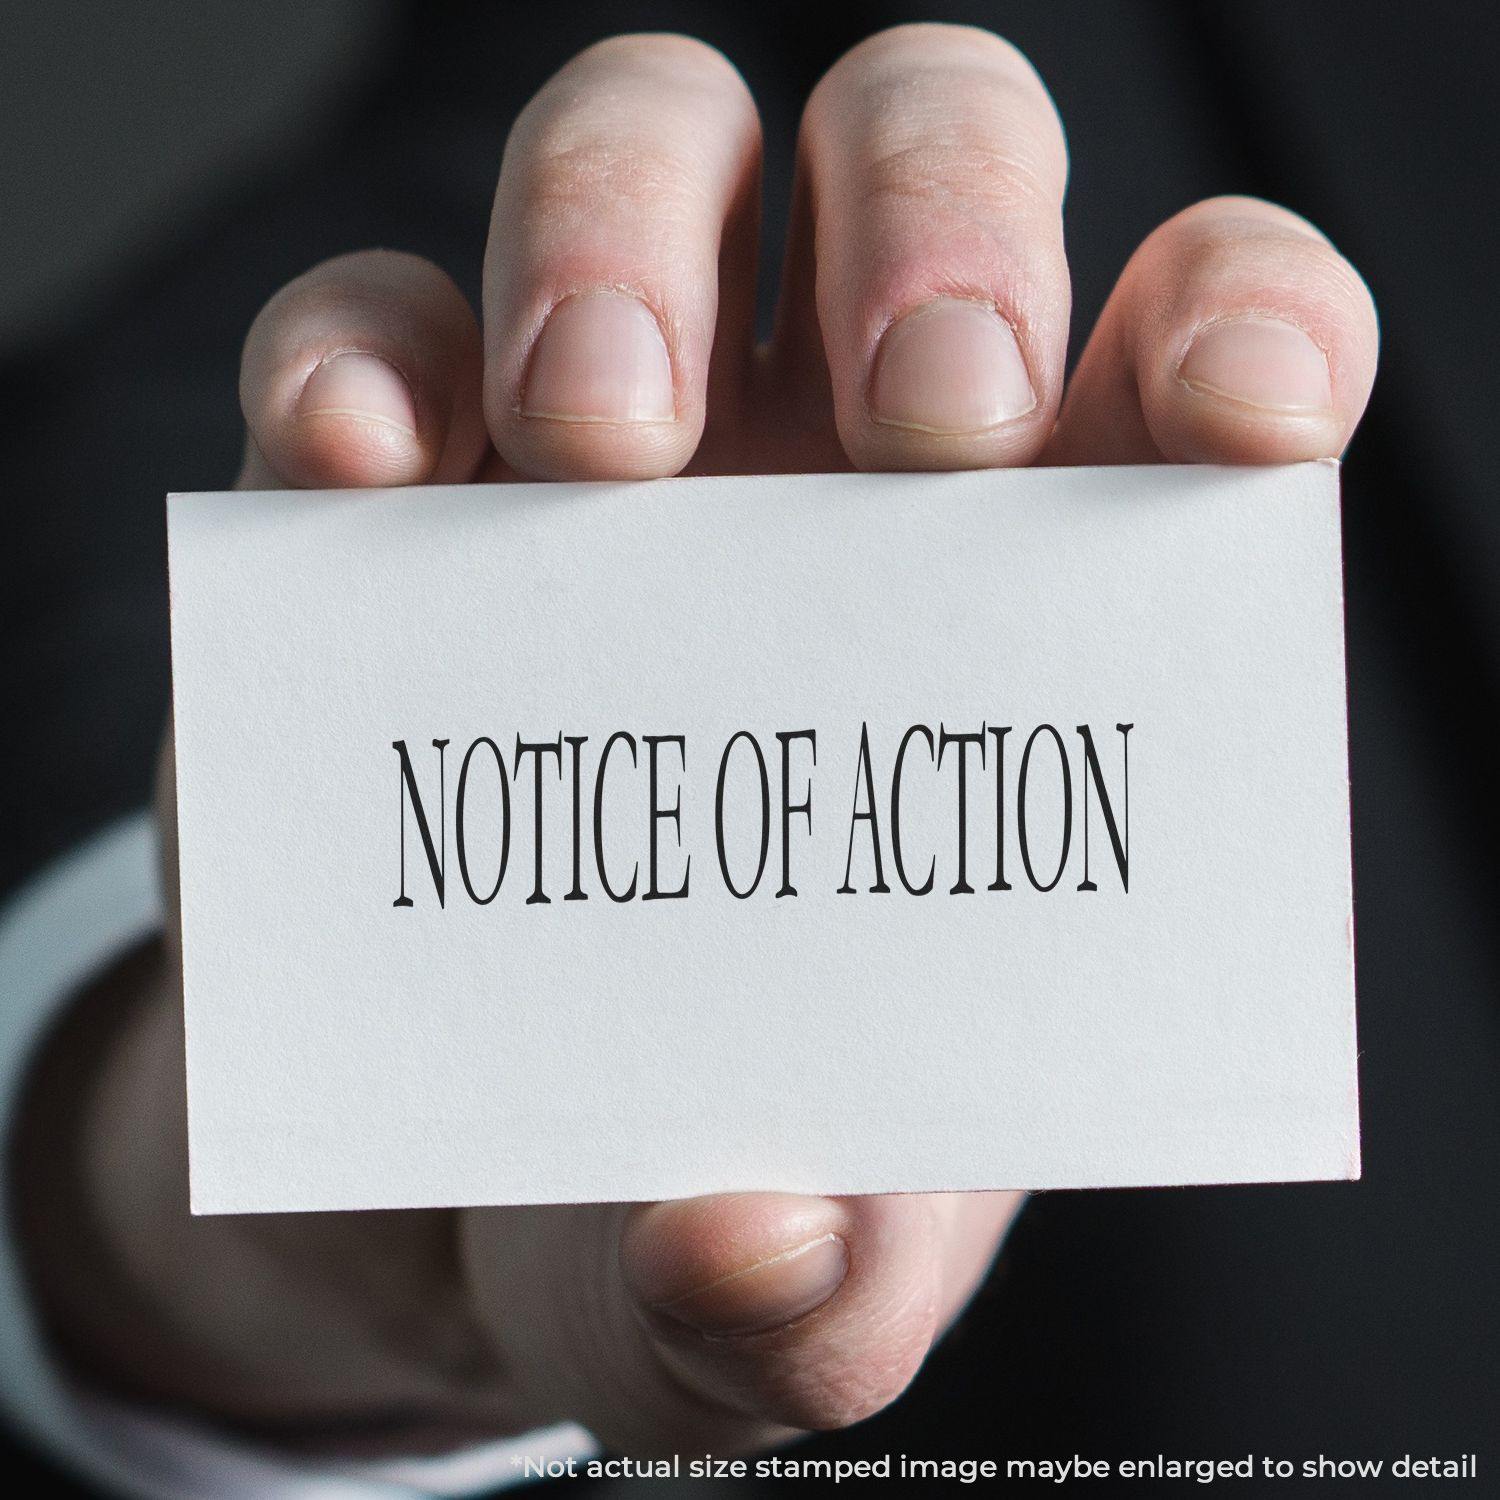 A stock office rubber stamp with a stamped image showing how the text "NOTICE OF ACTION" is displayed after stamping.